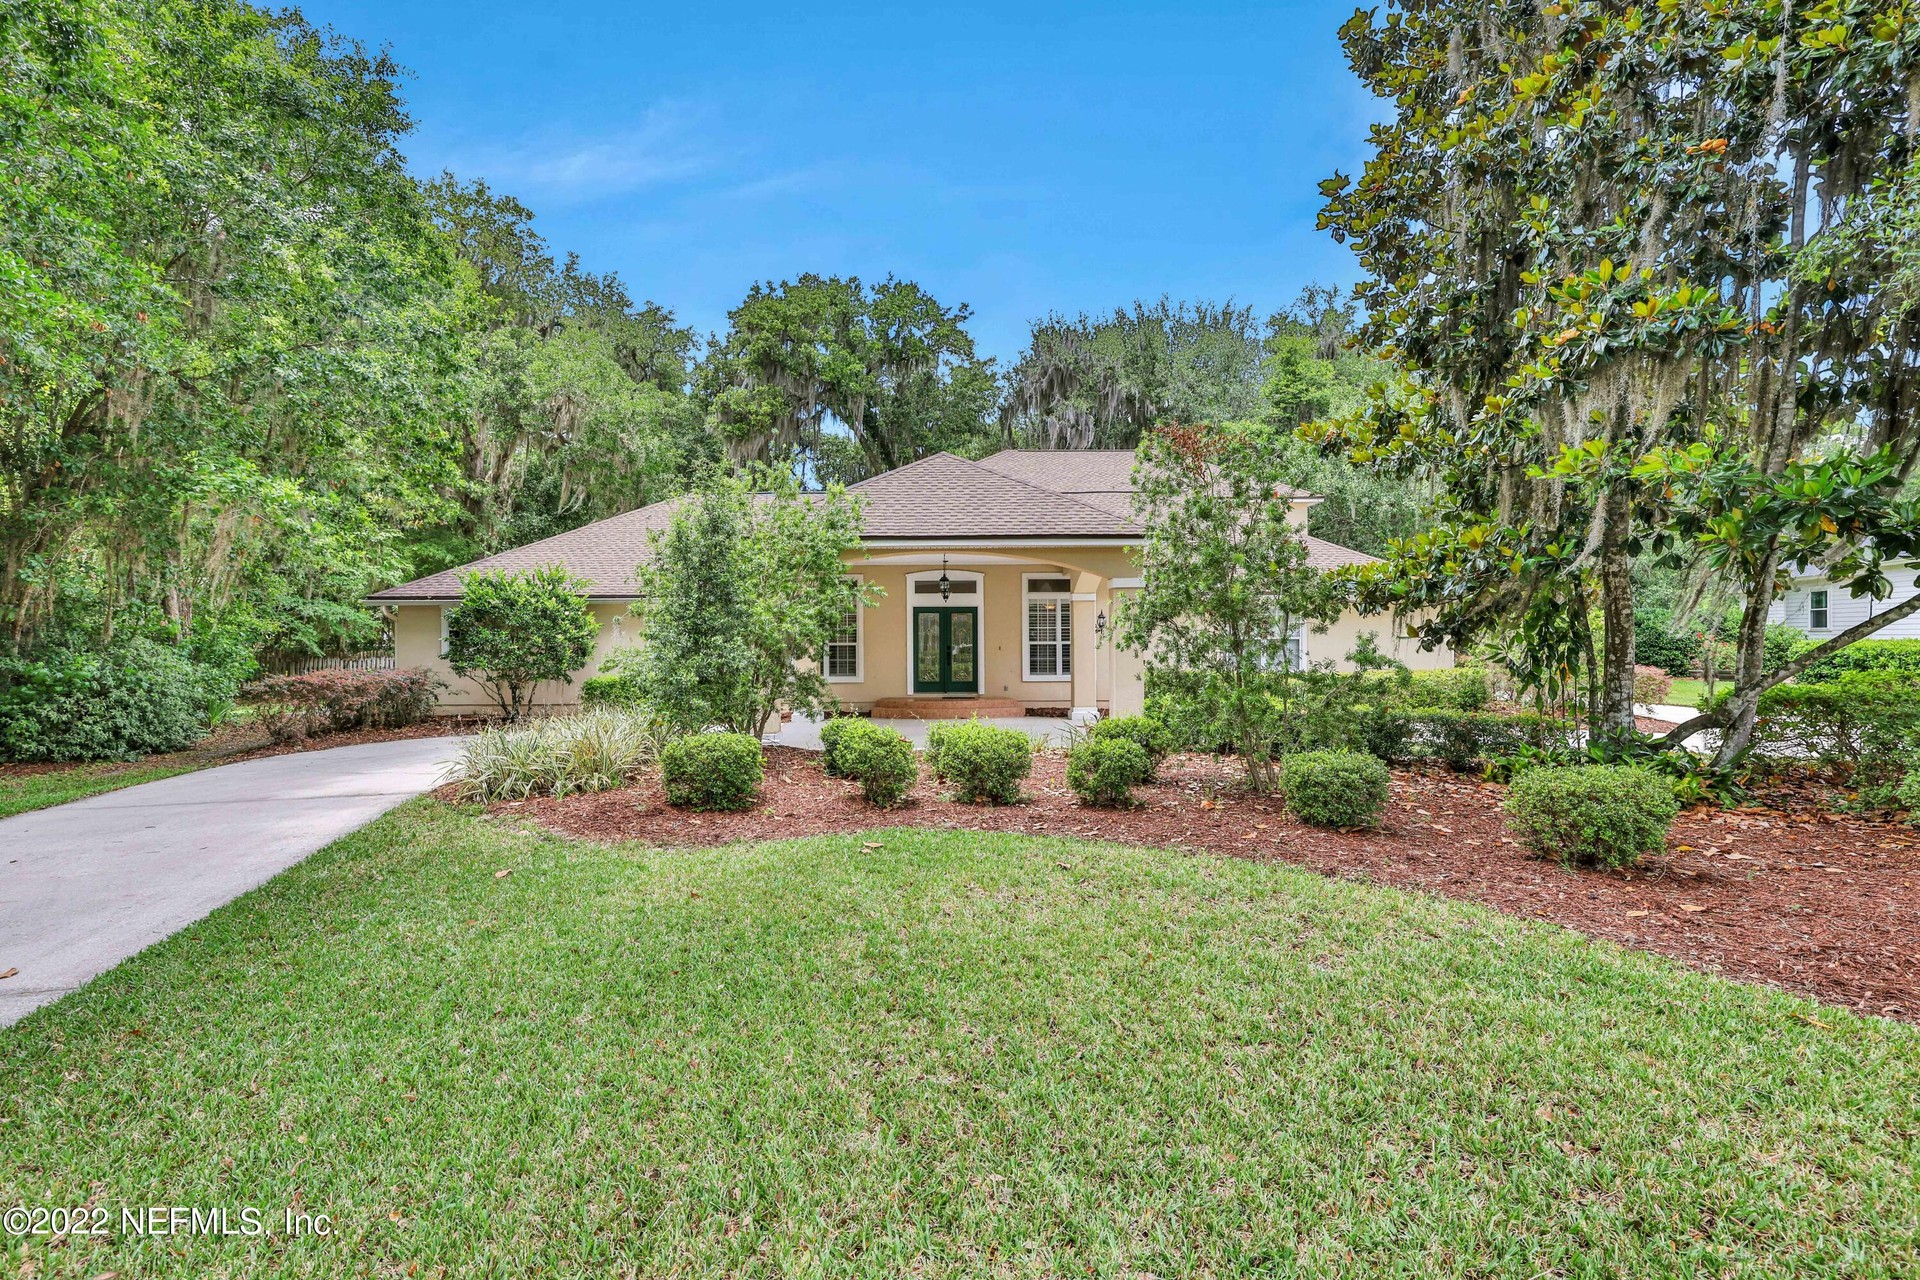 Unbelievable home located in St Johns county on large lot, amazing floor plan